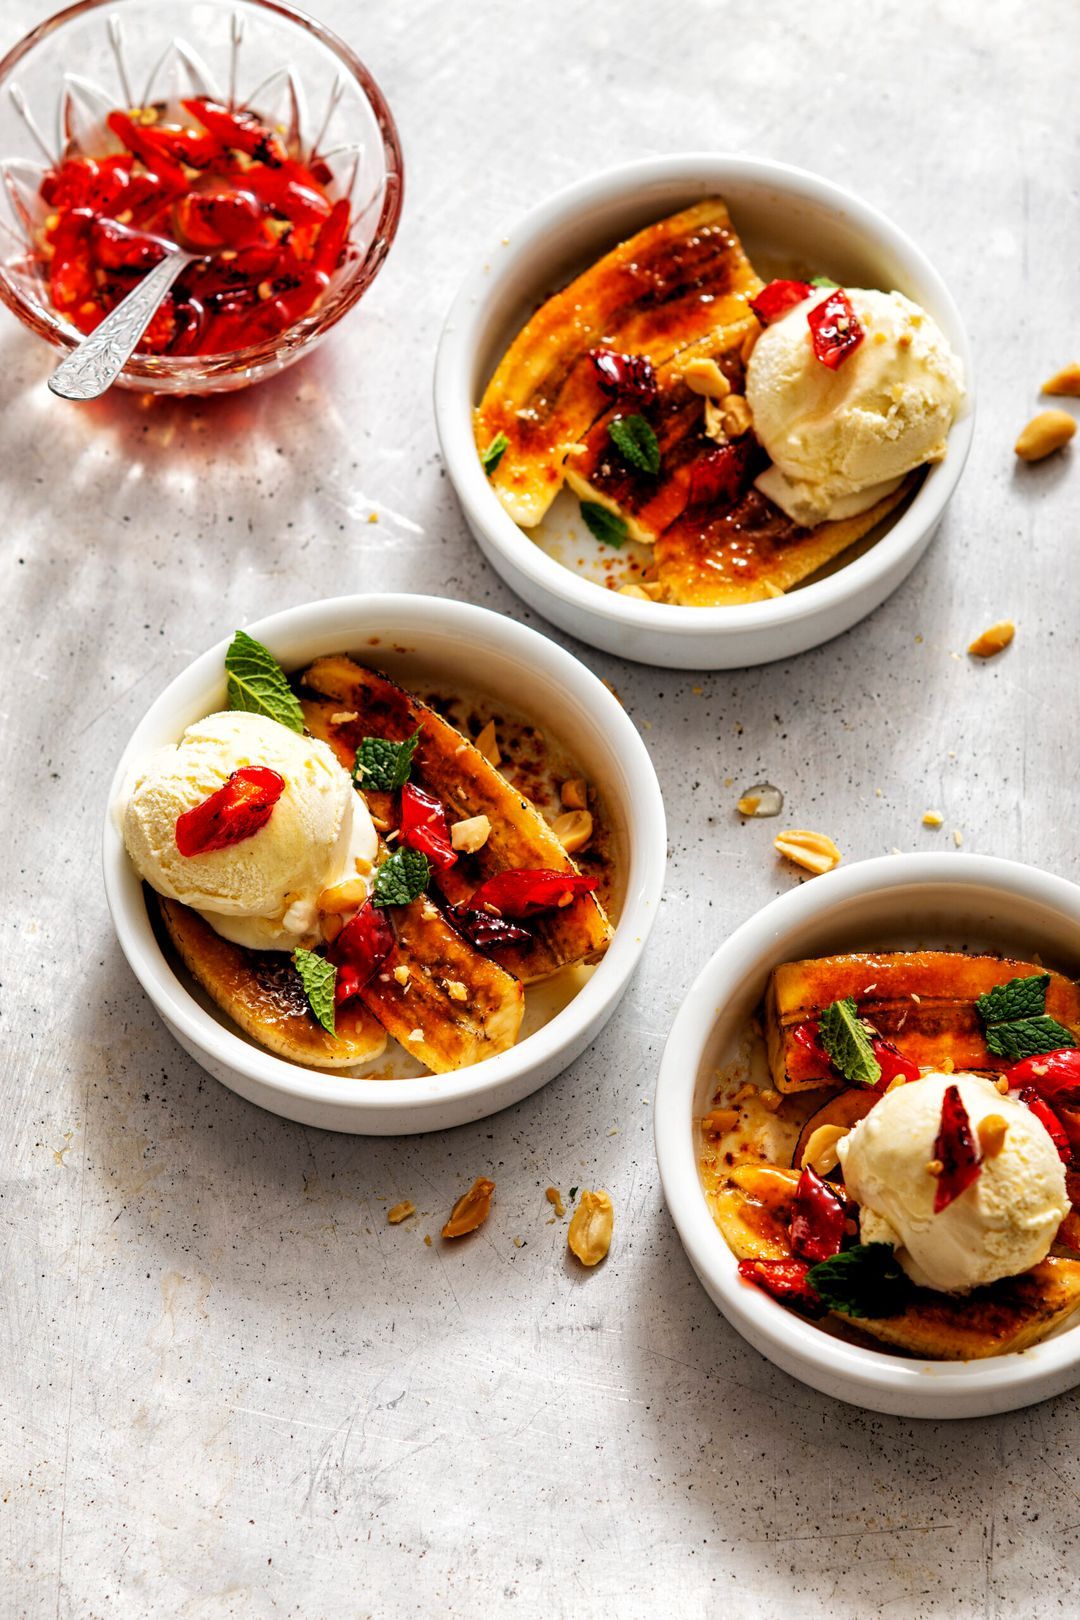 'Banane brûlée' with vanilla ice cream and candied chili pepper